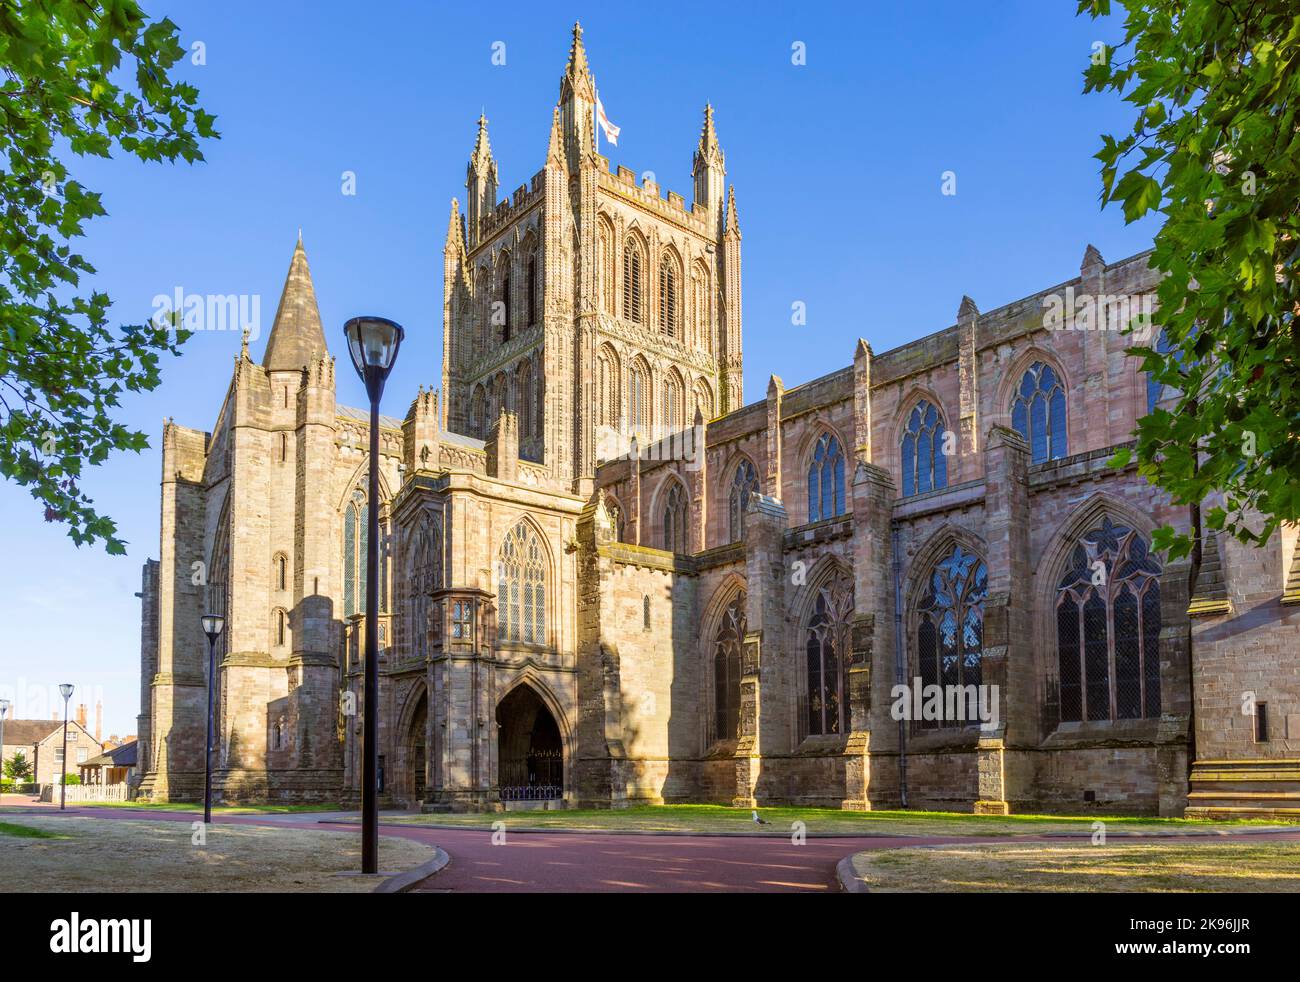 Hereford Cathedral College Cloisters Cathedral Close Hereford Herefordshire England UK GB Europe Banque D'Images